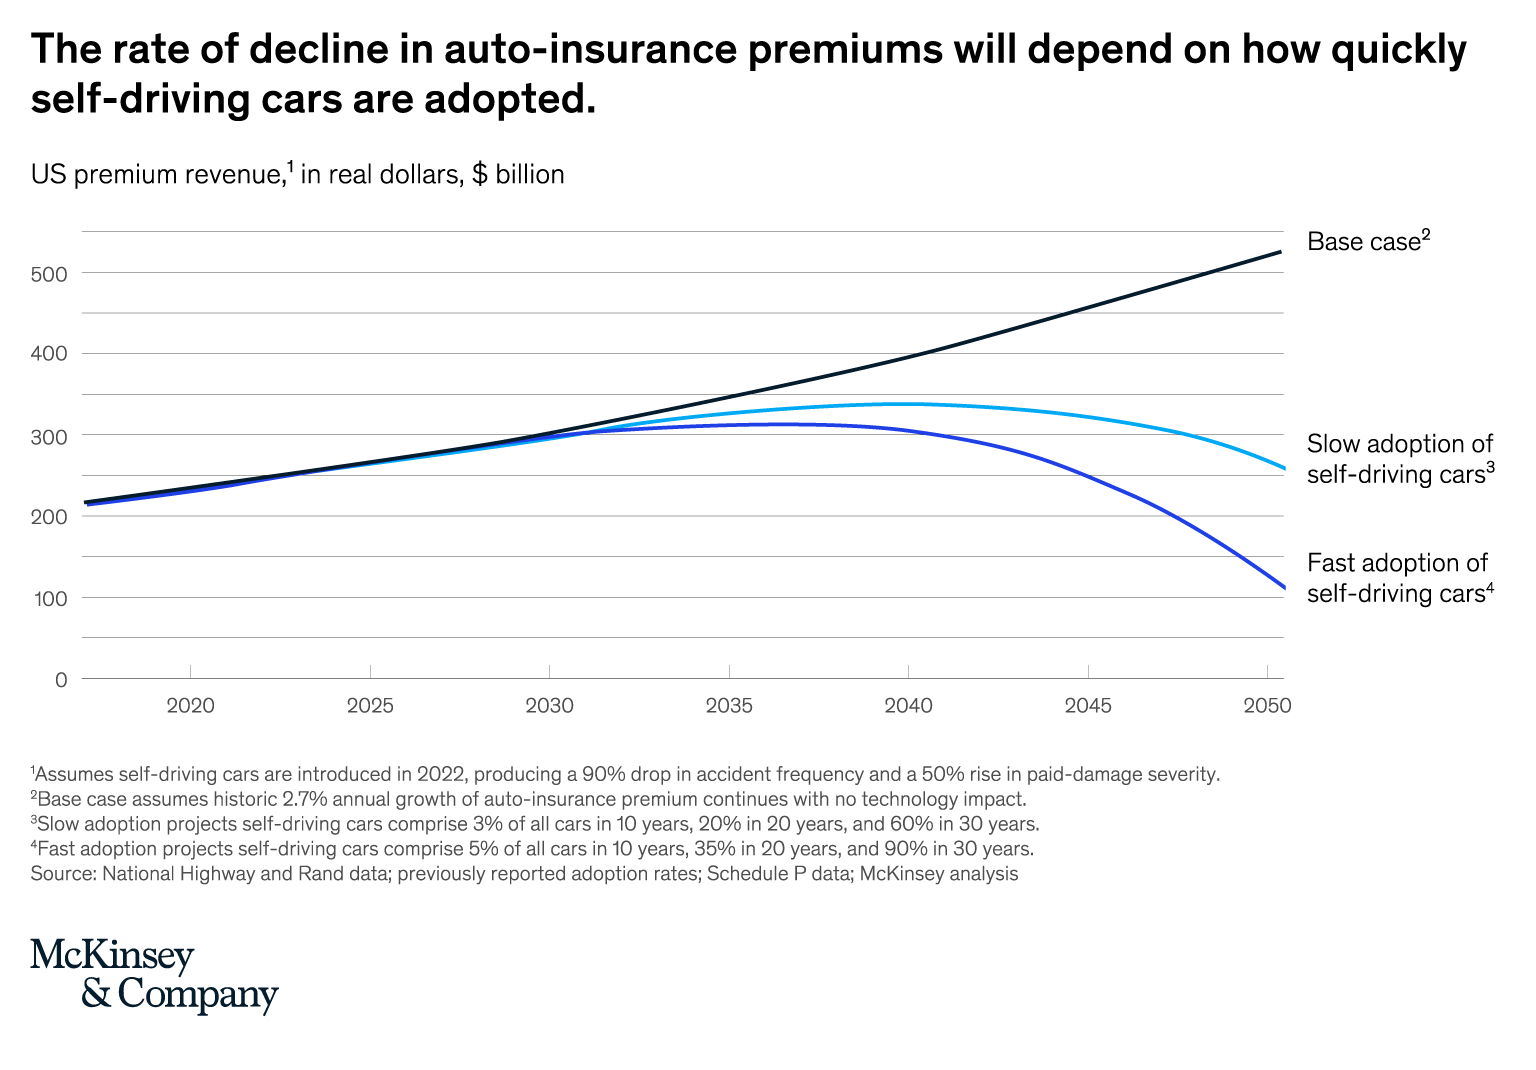 The rate of decline in auto-insurance premiums will depend on how quickly self-driving cars are adopted.